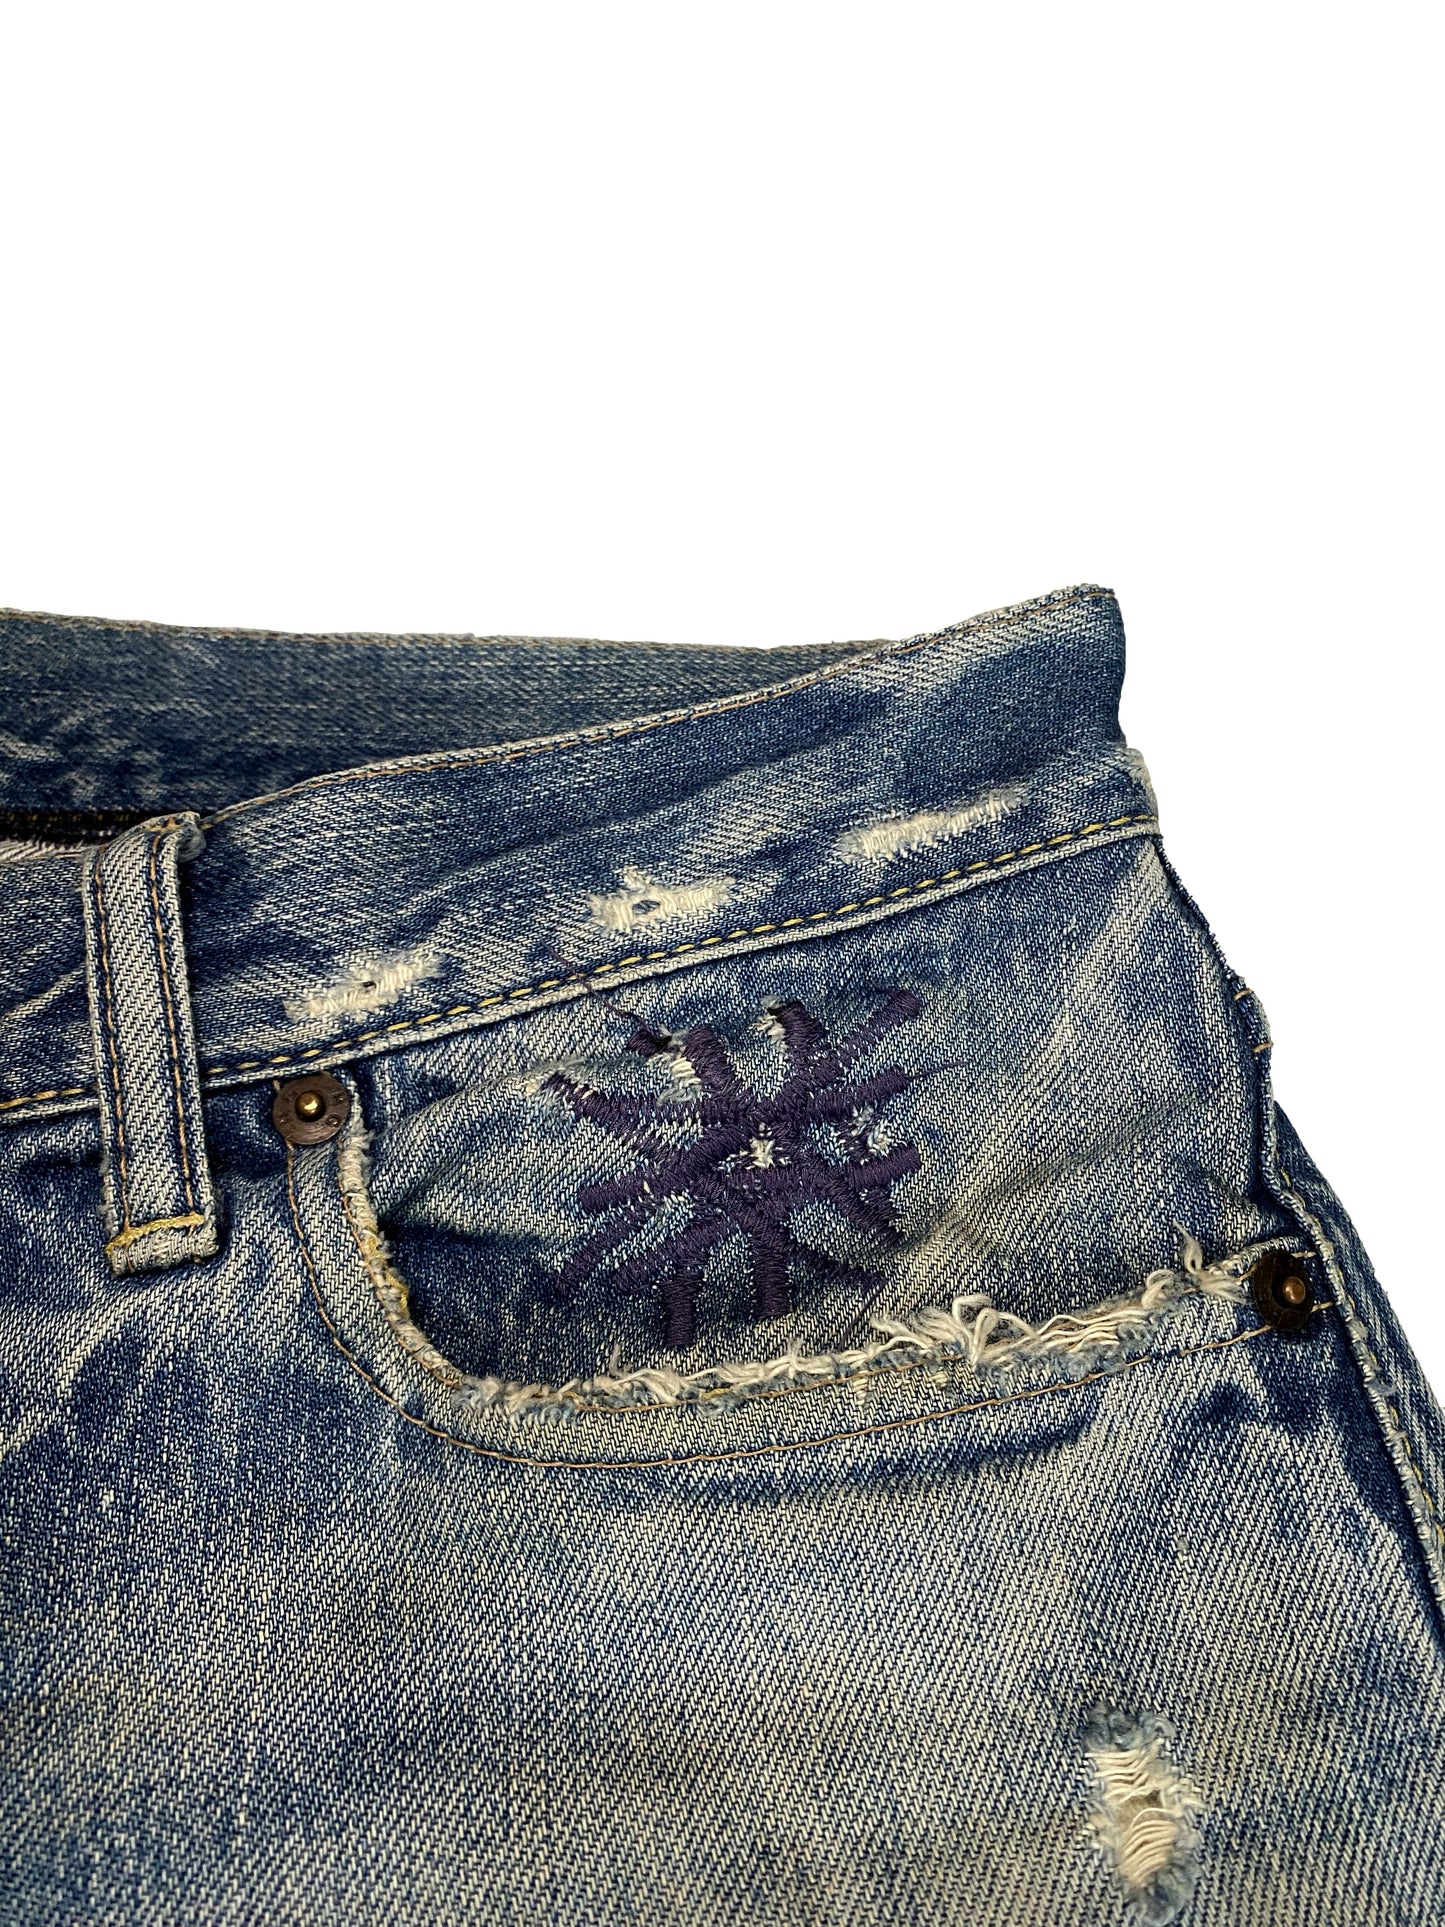 00s Hysteric Glamour Patch Jeans - 32